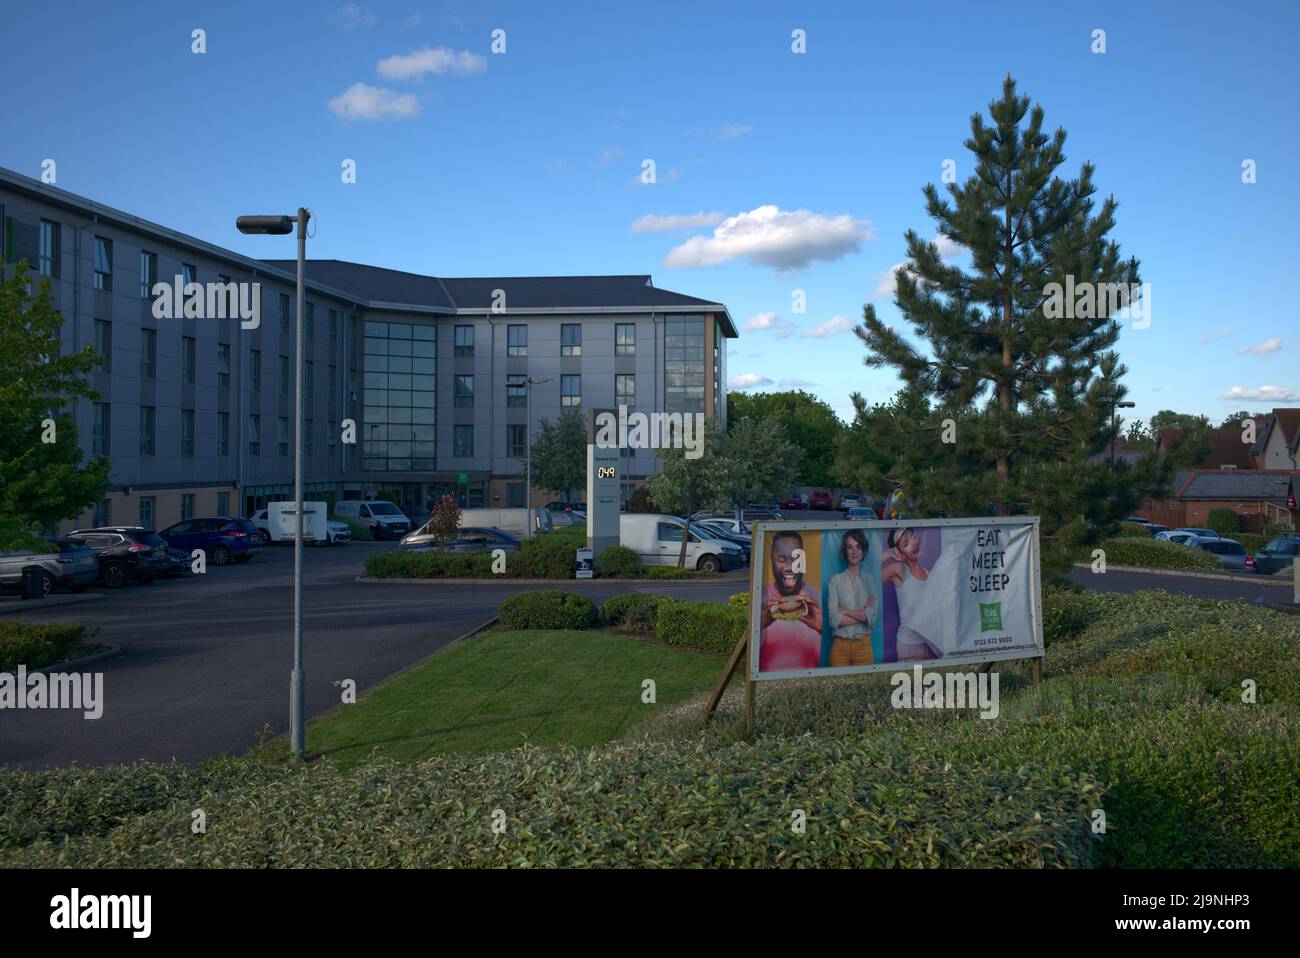 Images of the town of Dodworth near Barnsley in Yorkshire UK Stock Photo